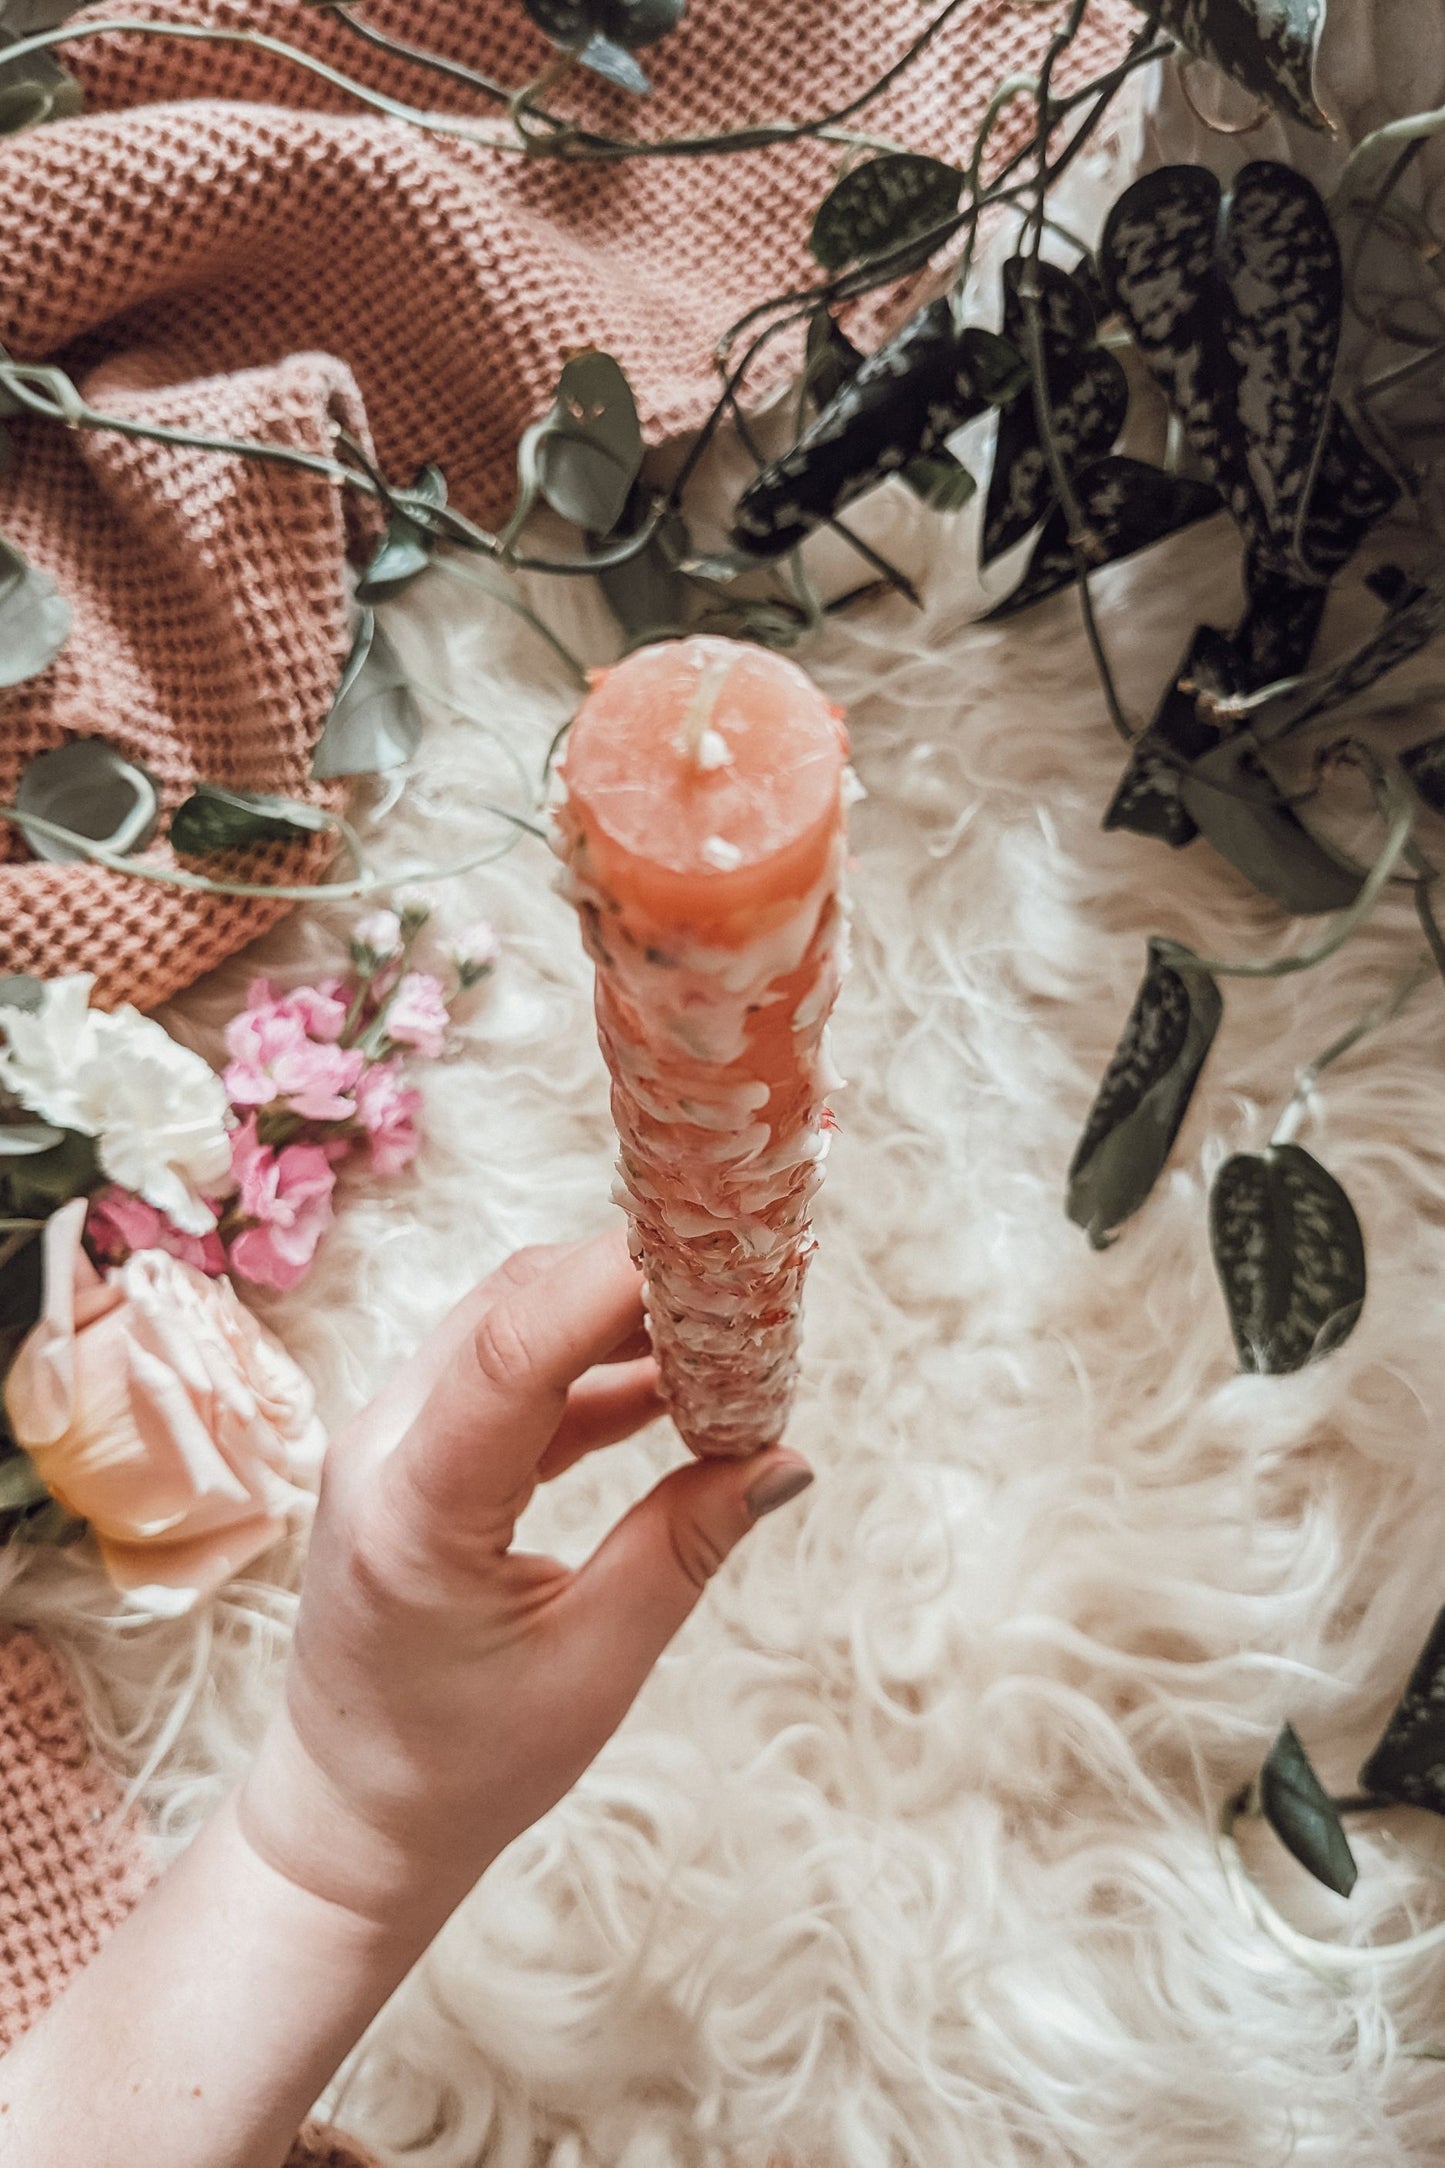 Admiration + Happiness Ochre Rose Spell Candle